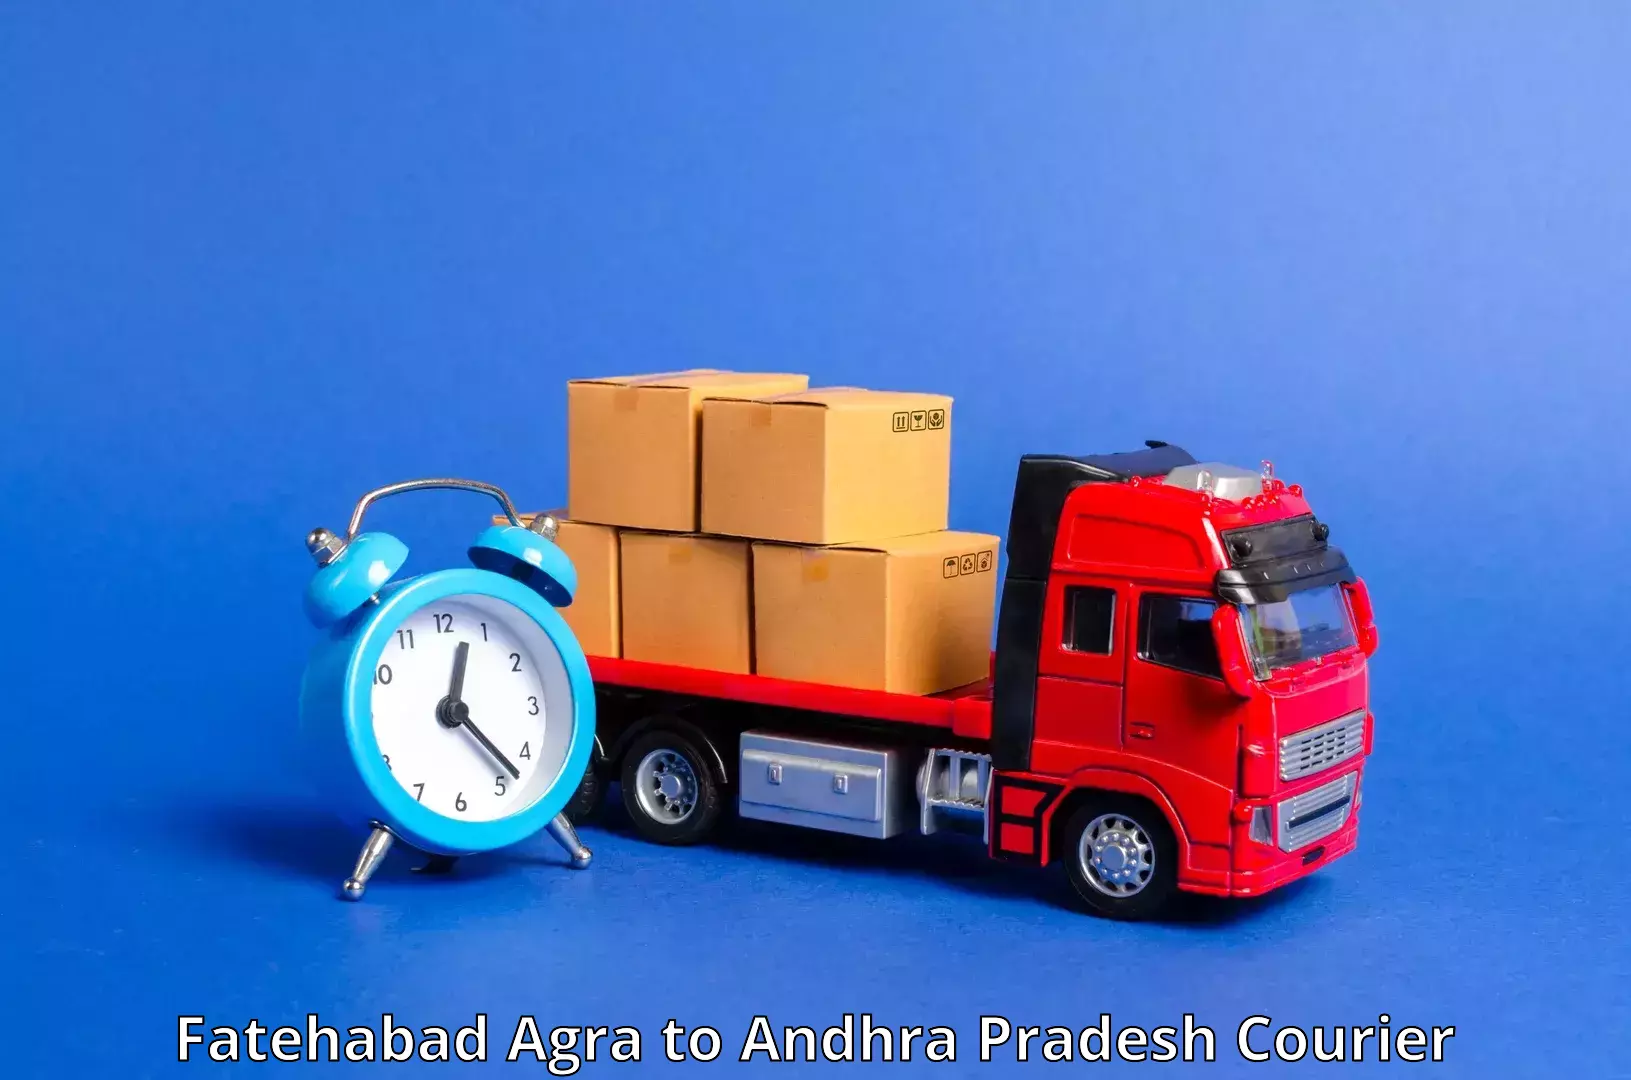 Package delivery network Fatehabad Agra to Salur